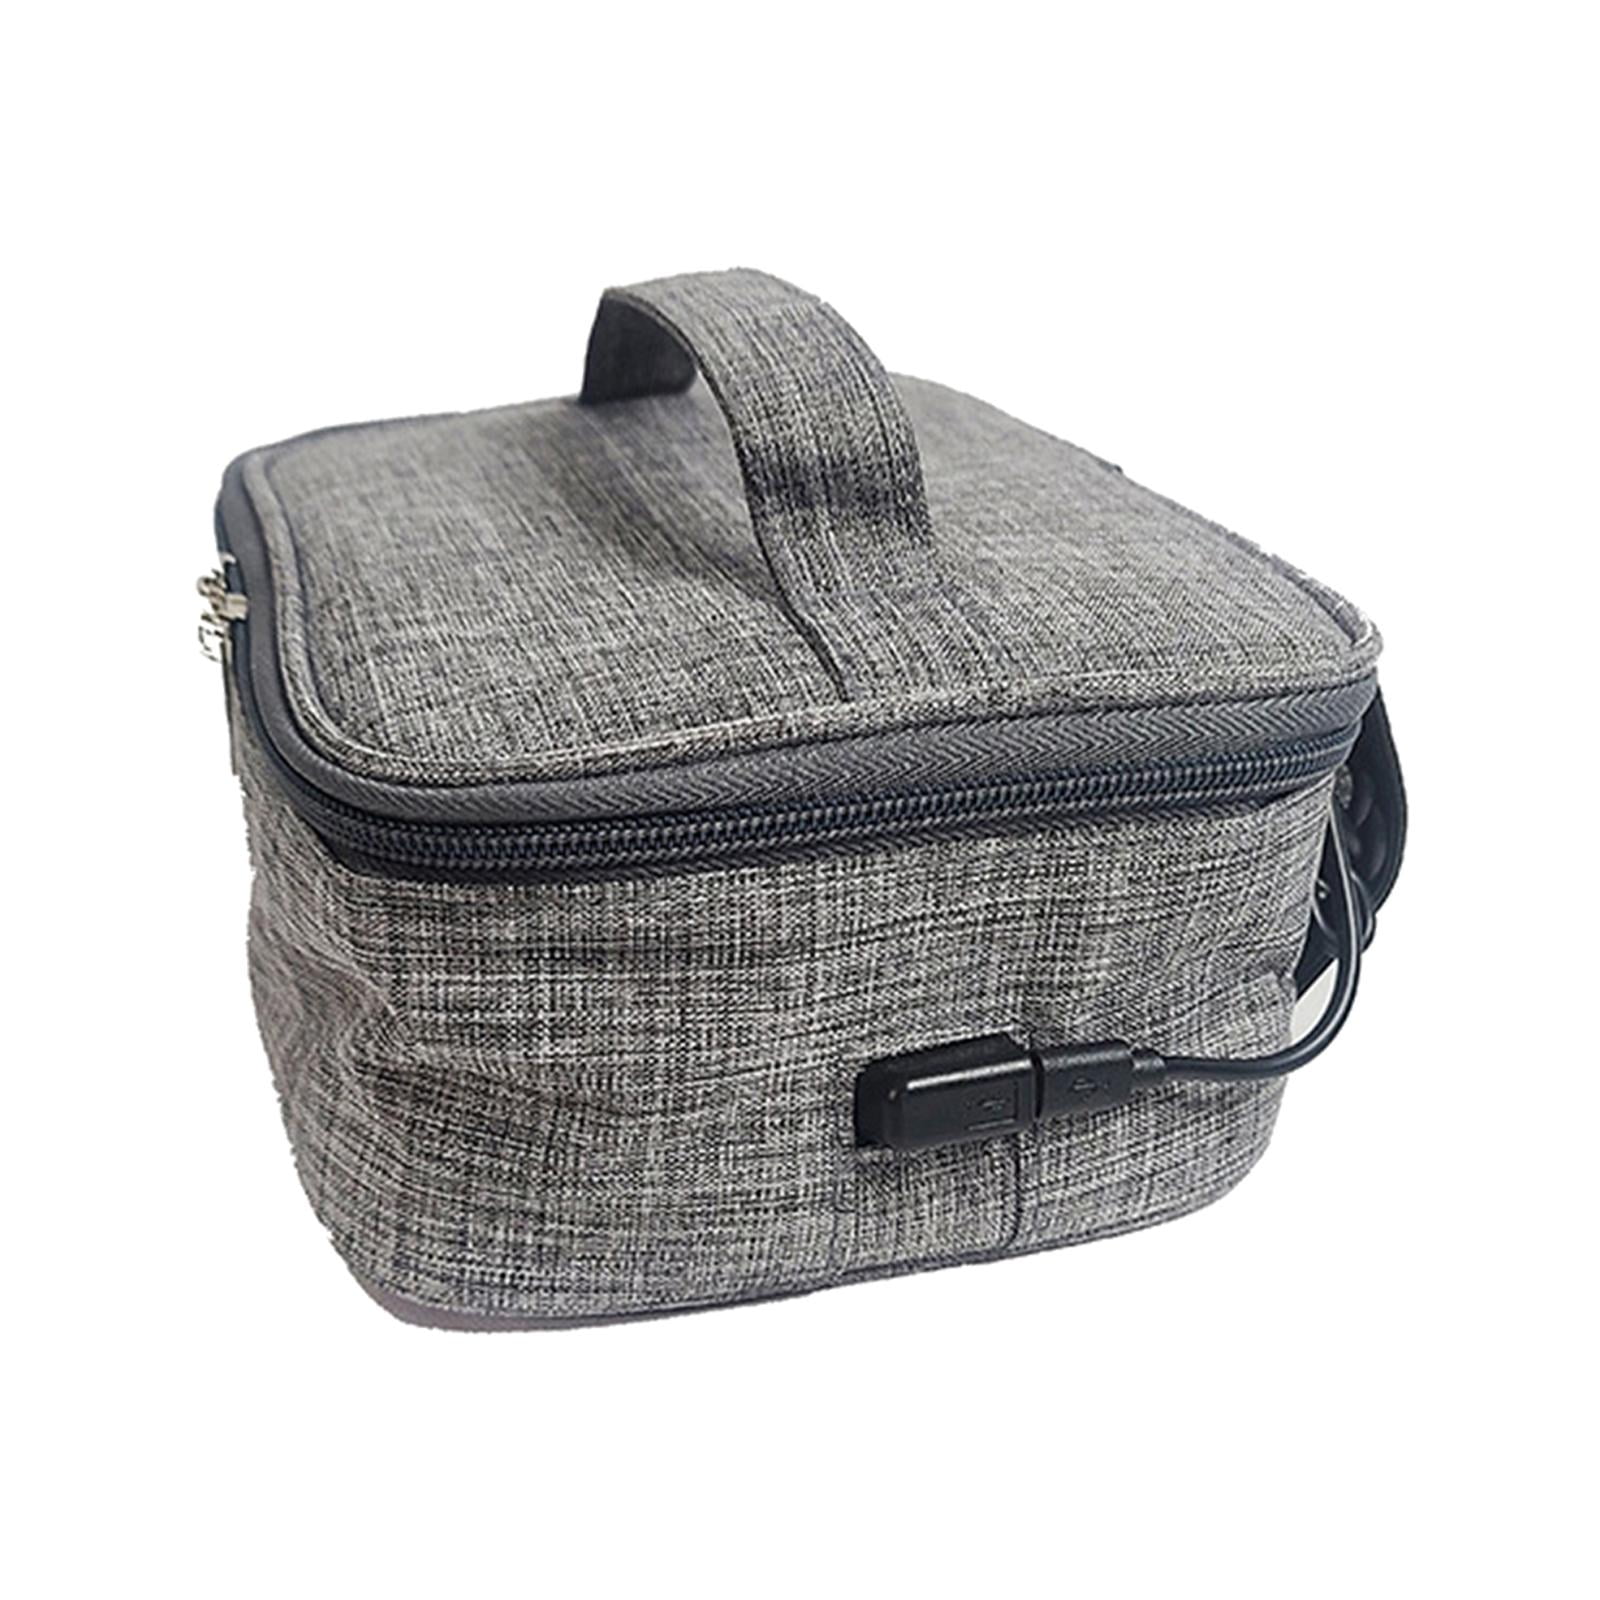 USB Heating Lunch Box Insulated Lunch Bag for Women Men Meal Prep